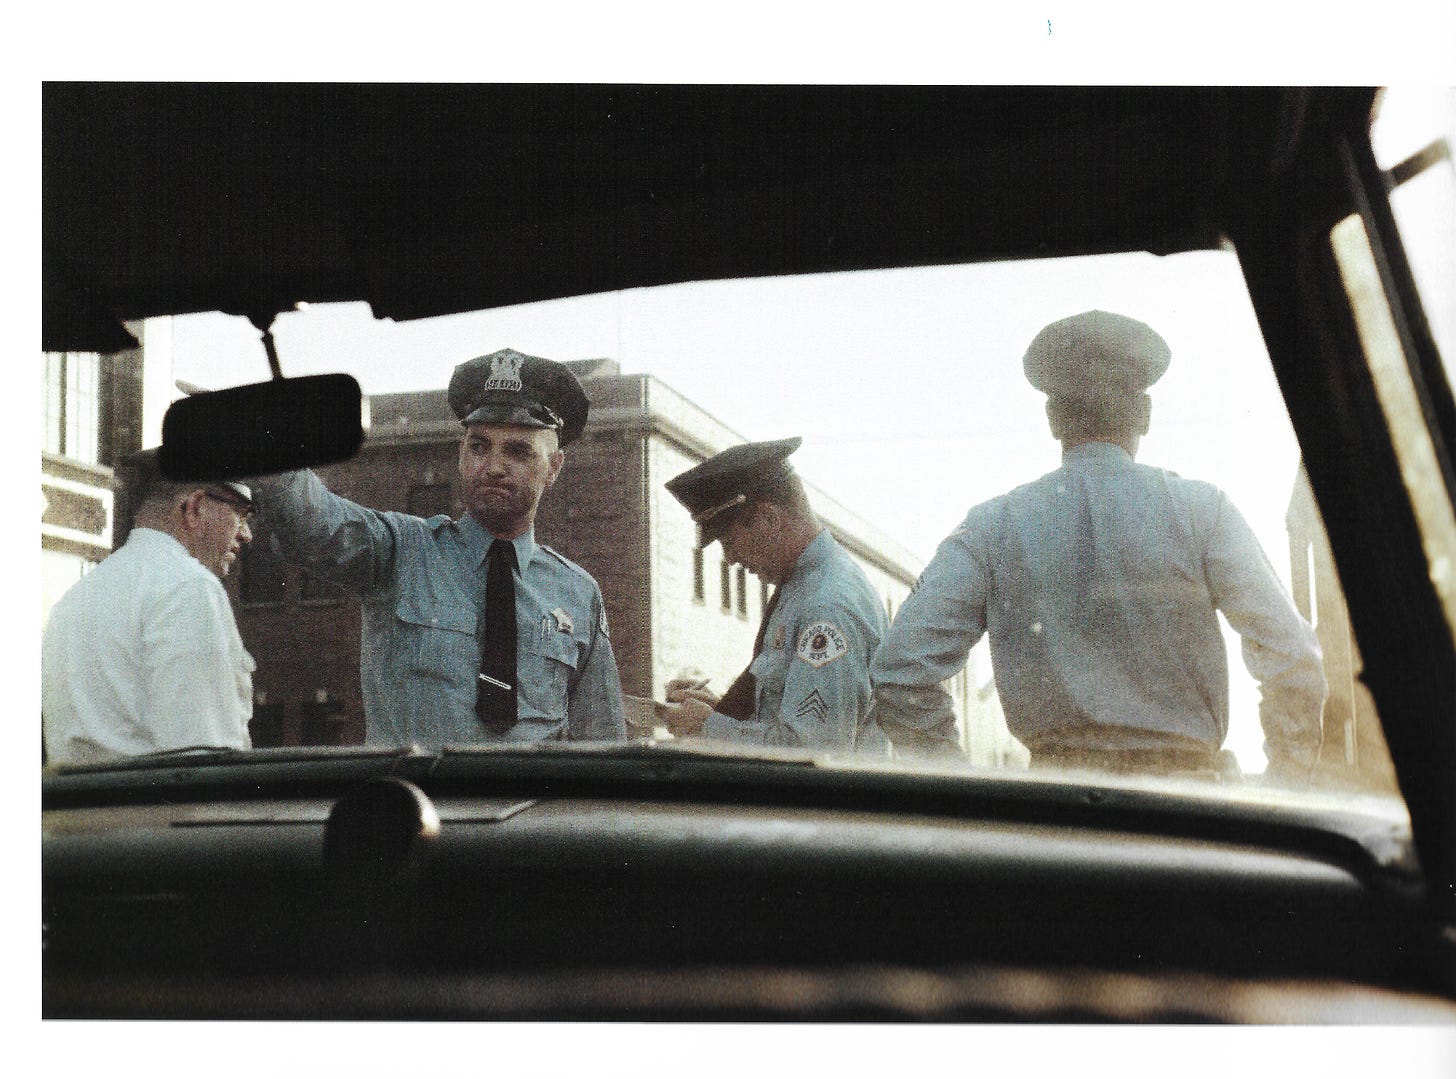 Four policemen, taken by Parks from the back seat of a police car